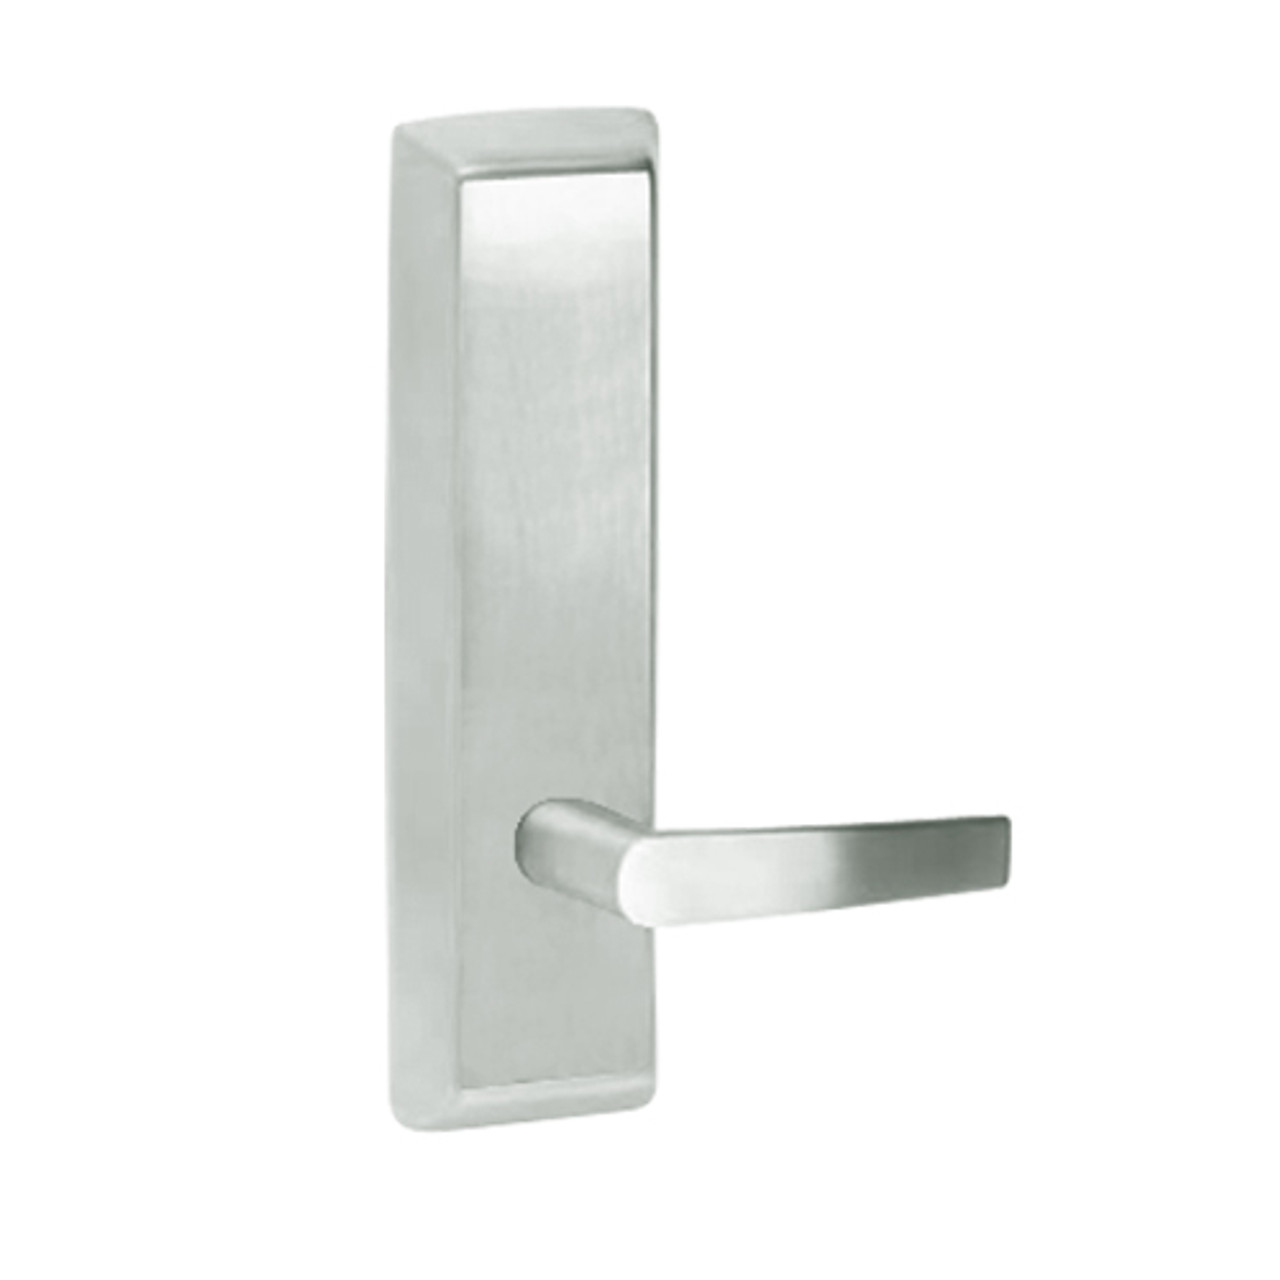 A957-618-RHR Corbin ED5000 Series Exit Device Trim with Nightlatch Armstrong Lever in Bright Nickel Finish